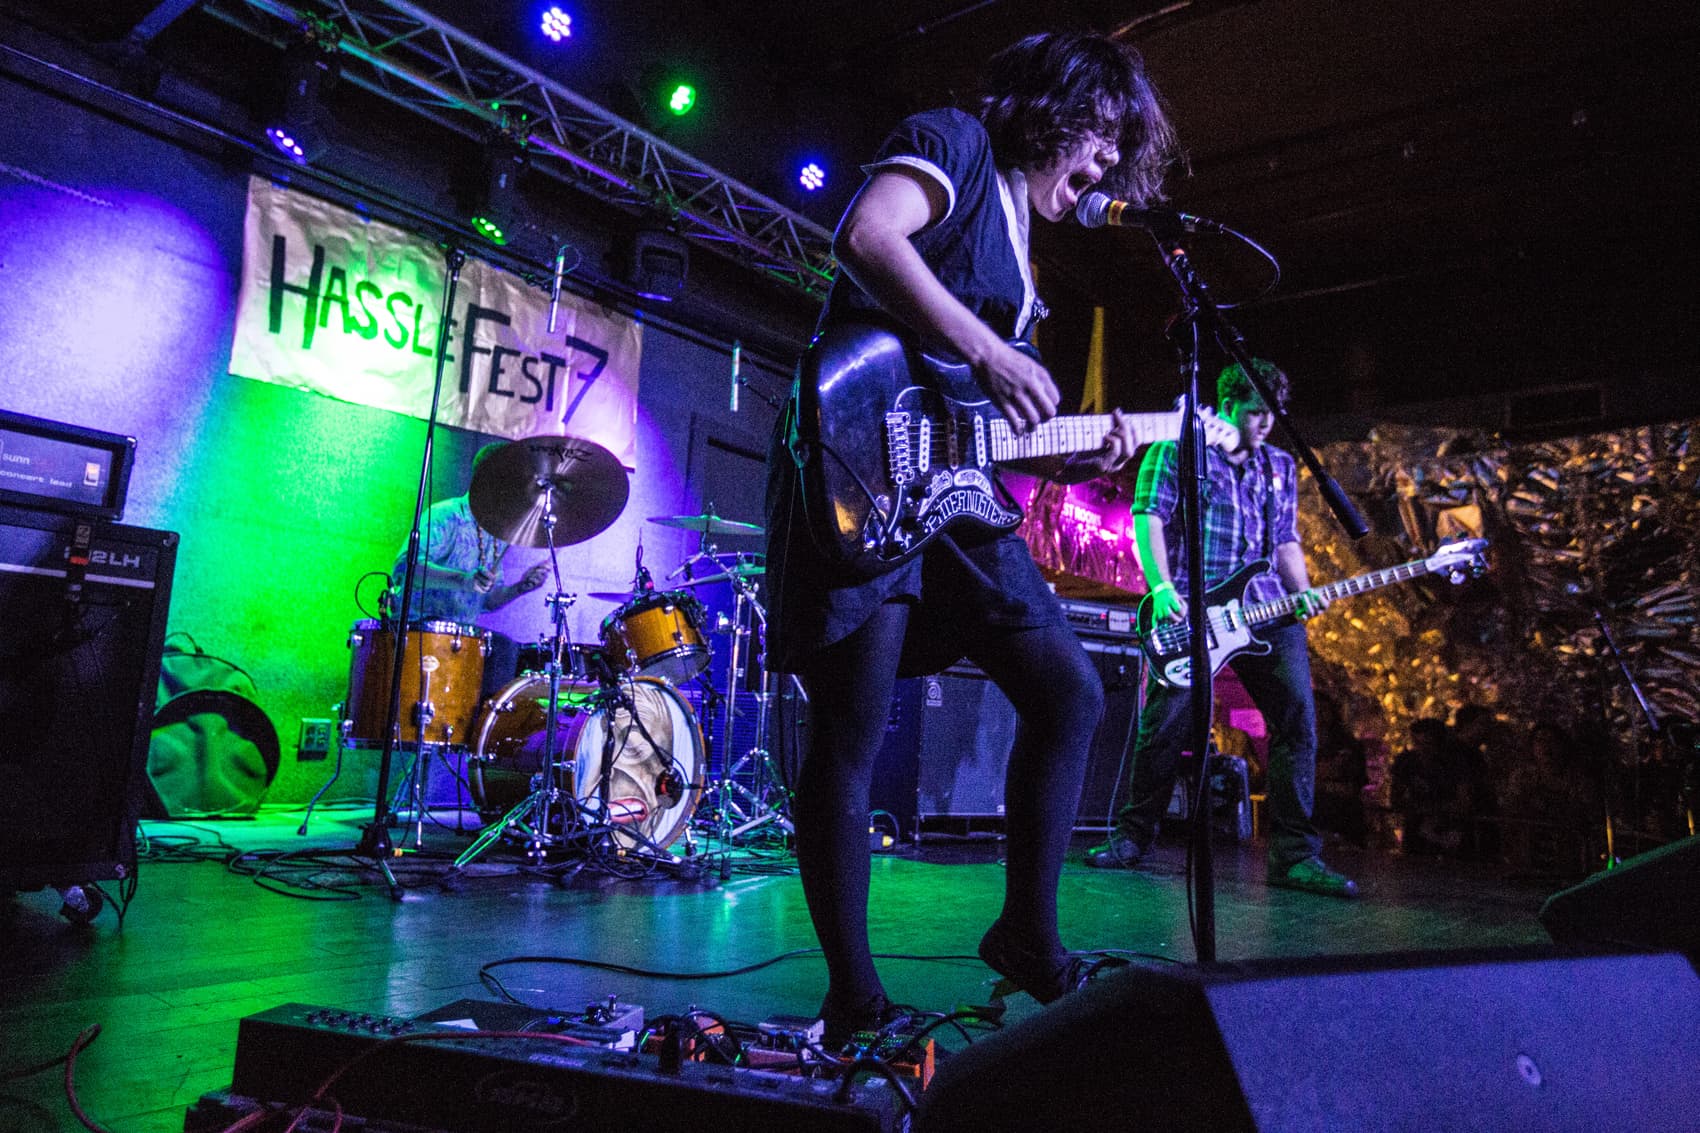 Ben Stas of Screaming Females at Hasslefest 7 that was hosted at Brighton Music Hall in 2015. (Courtesy Ben Stas)